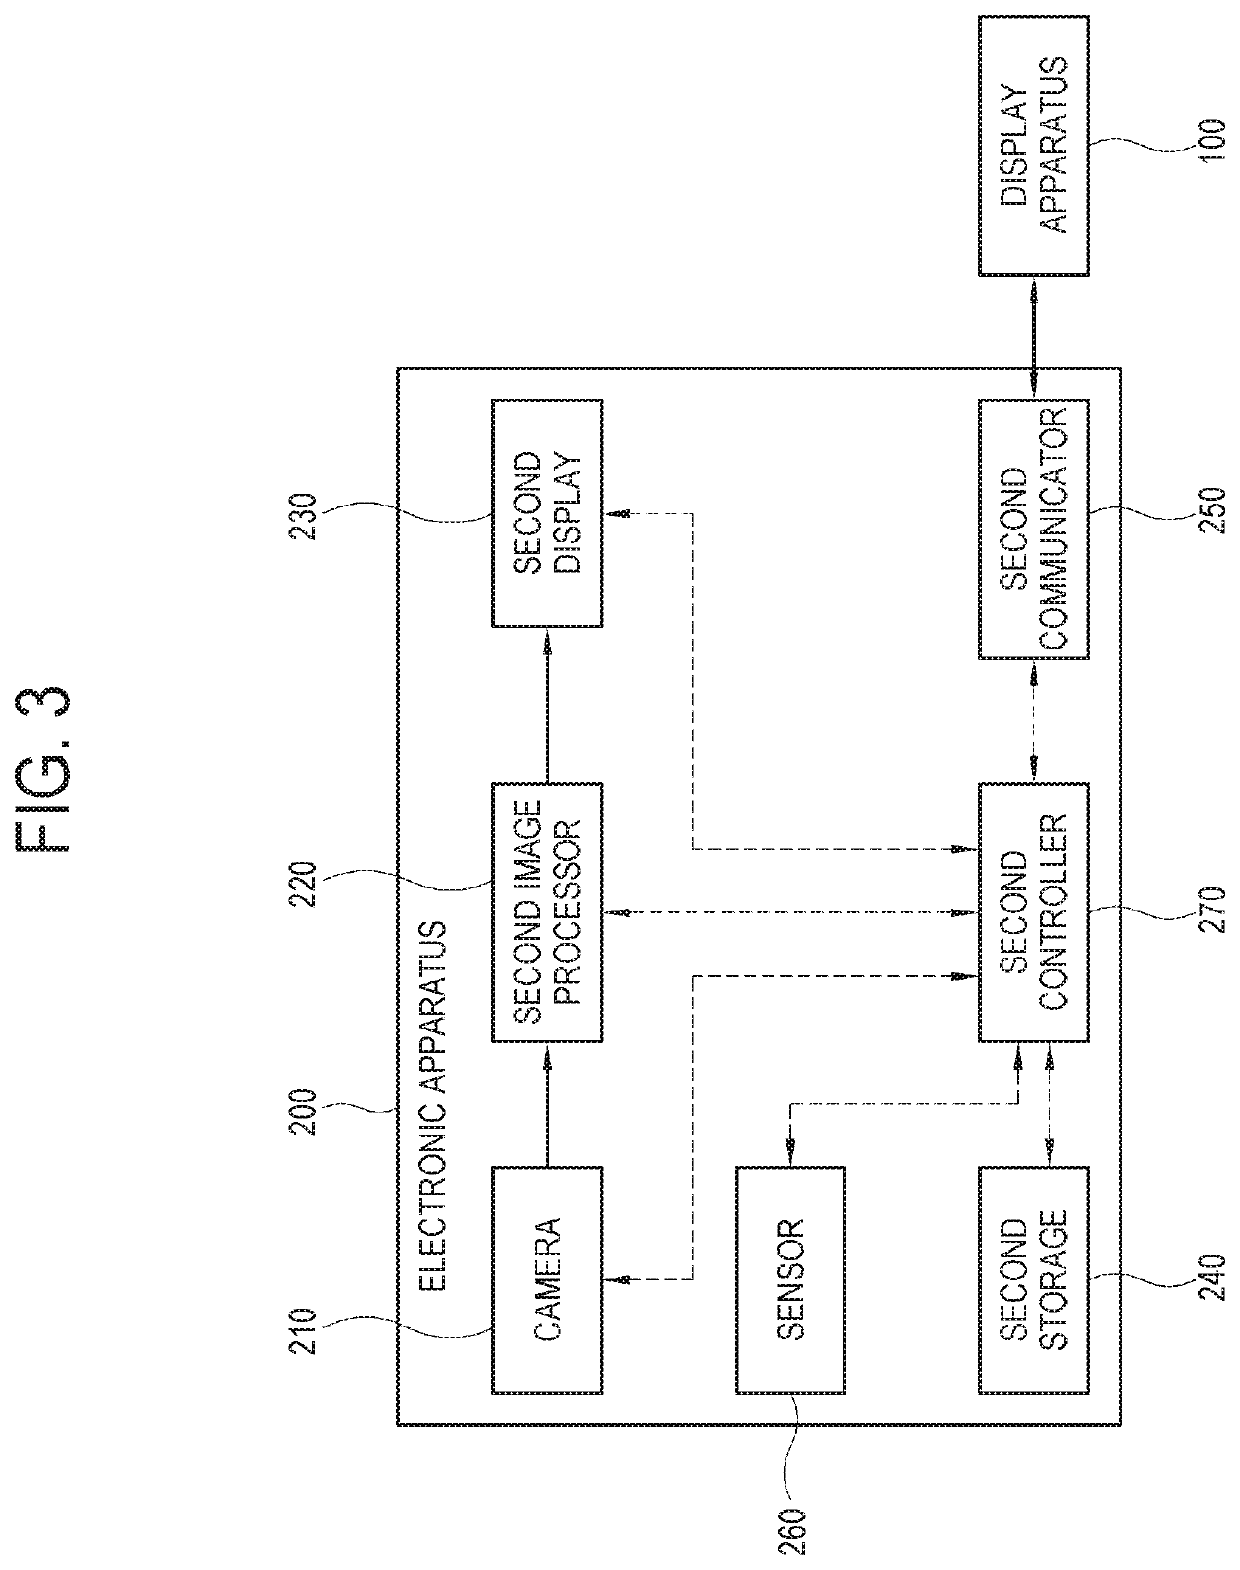 Controlling a display apparatus using a virtual UI provided by an electronic apparatus